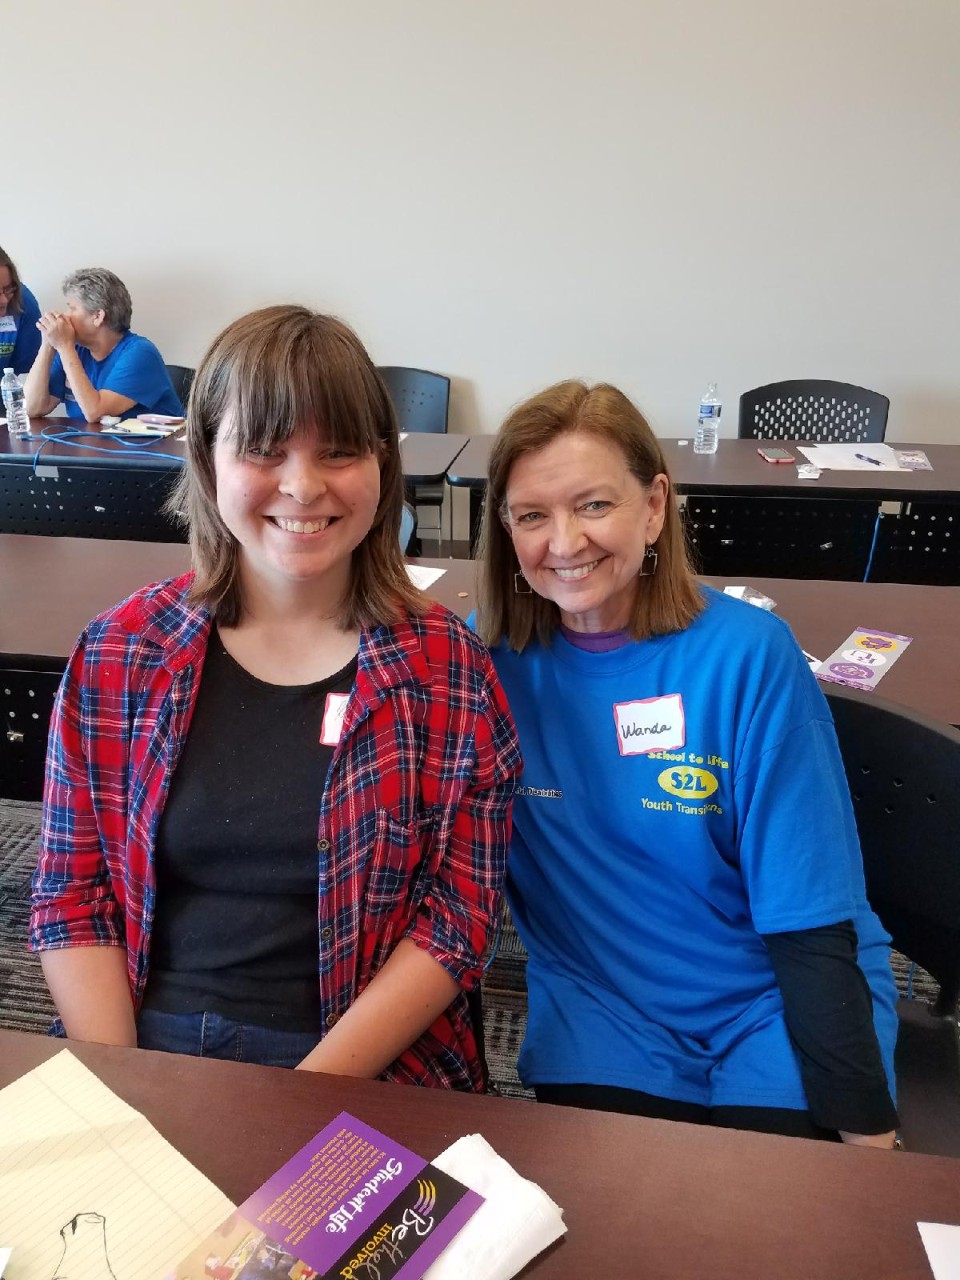 Wanda and a young woman with a disability sit beside each other in a classroom; Wanda is wearing a bright blue shirt representing the youth leadership program she is visiting in Paris, TN